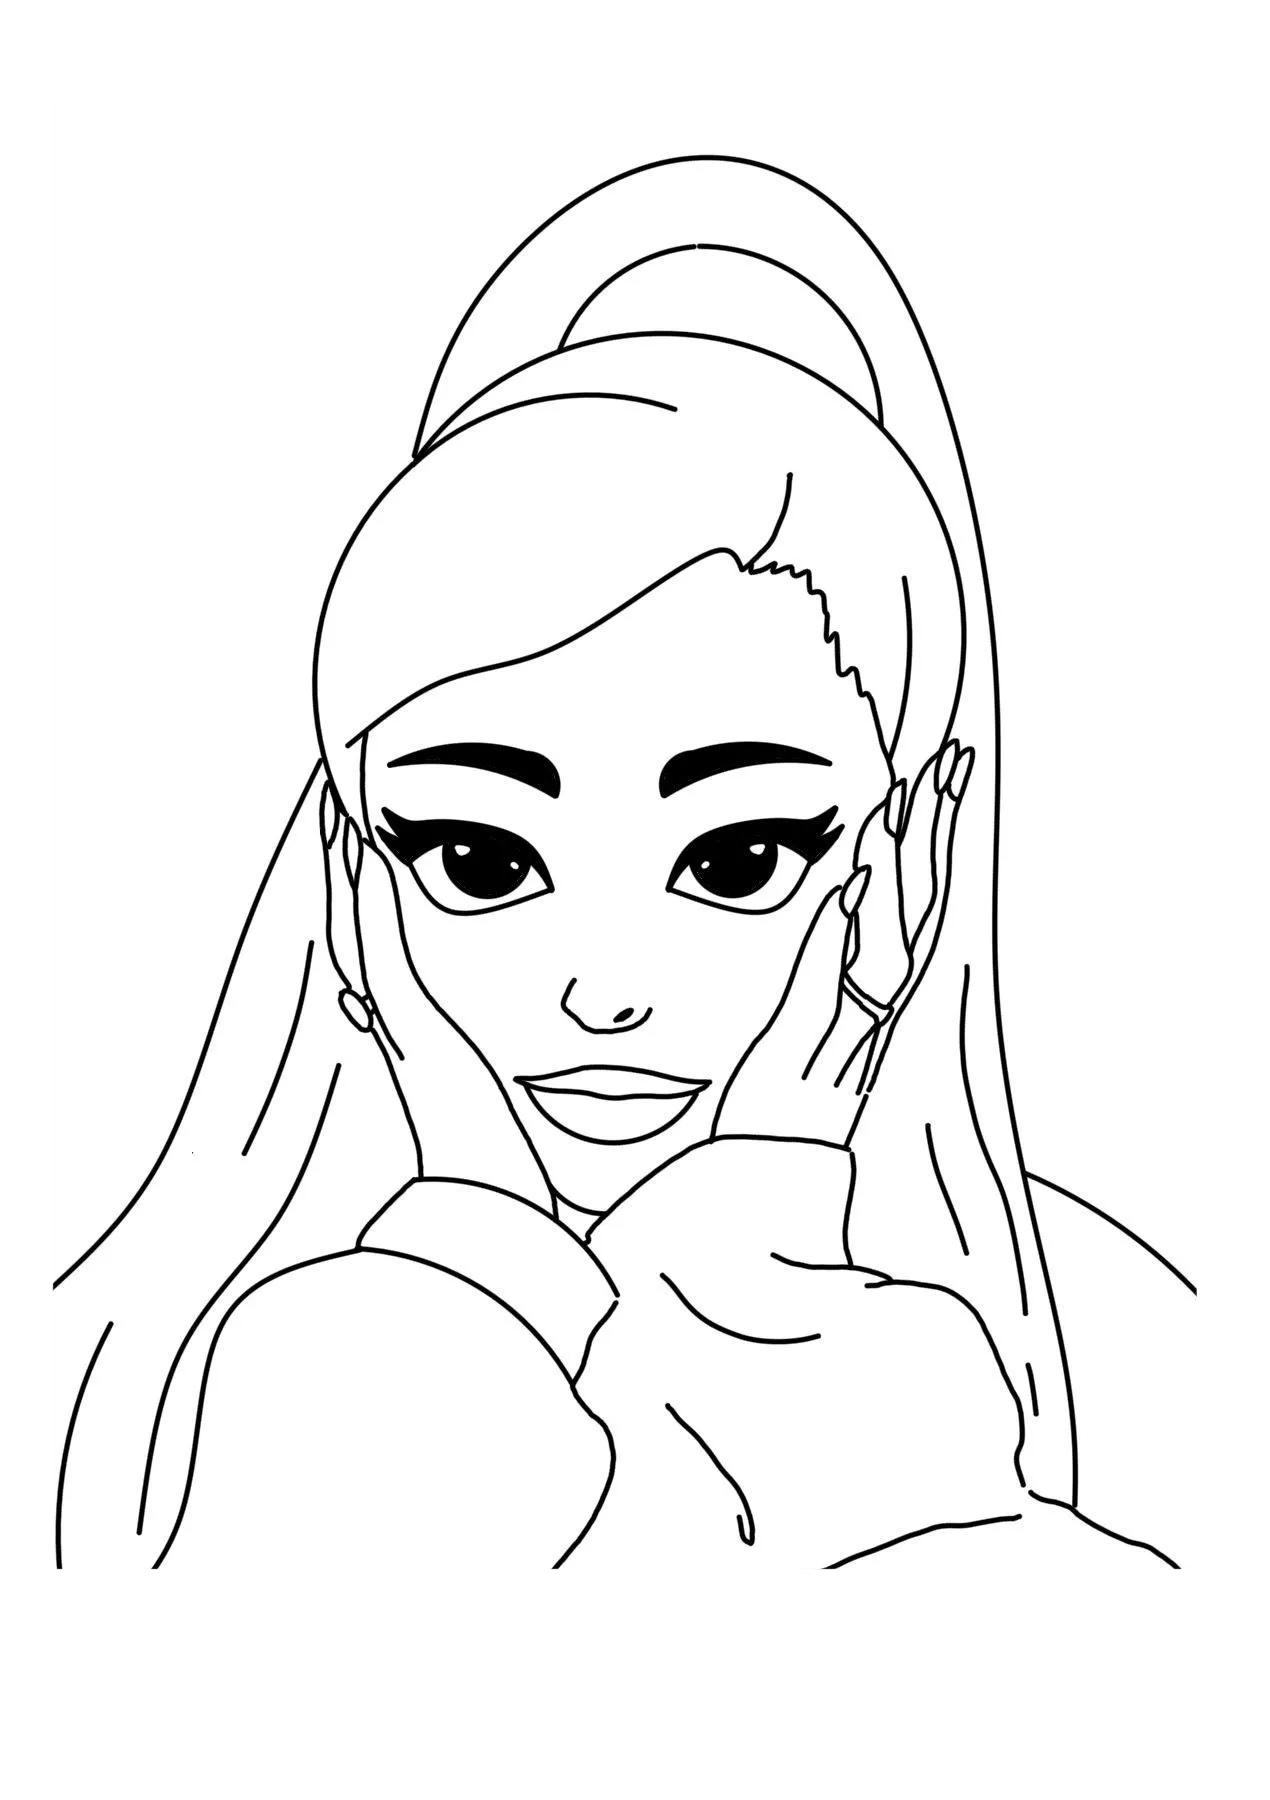 Ariana Grande Coloring Pages